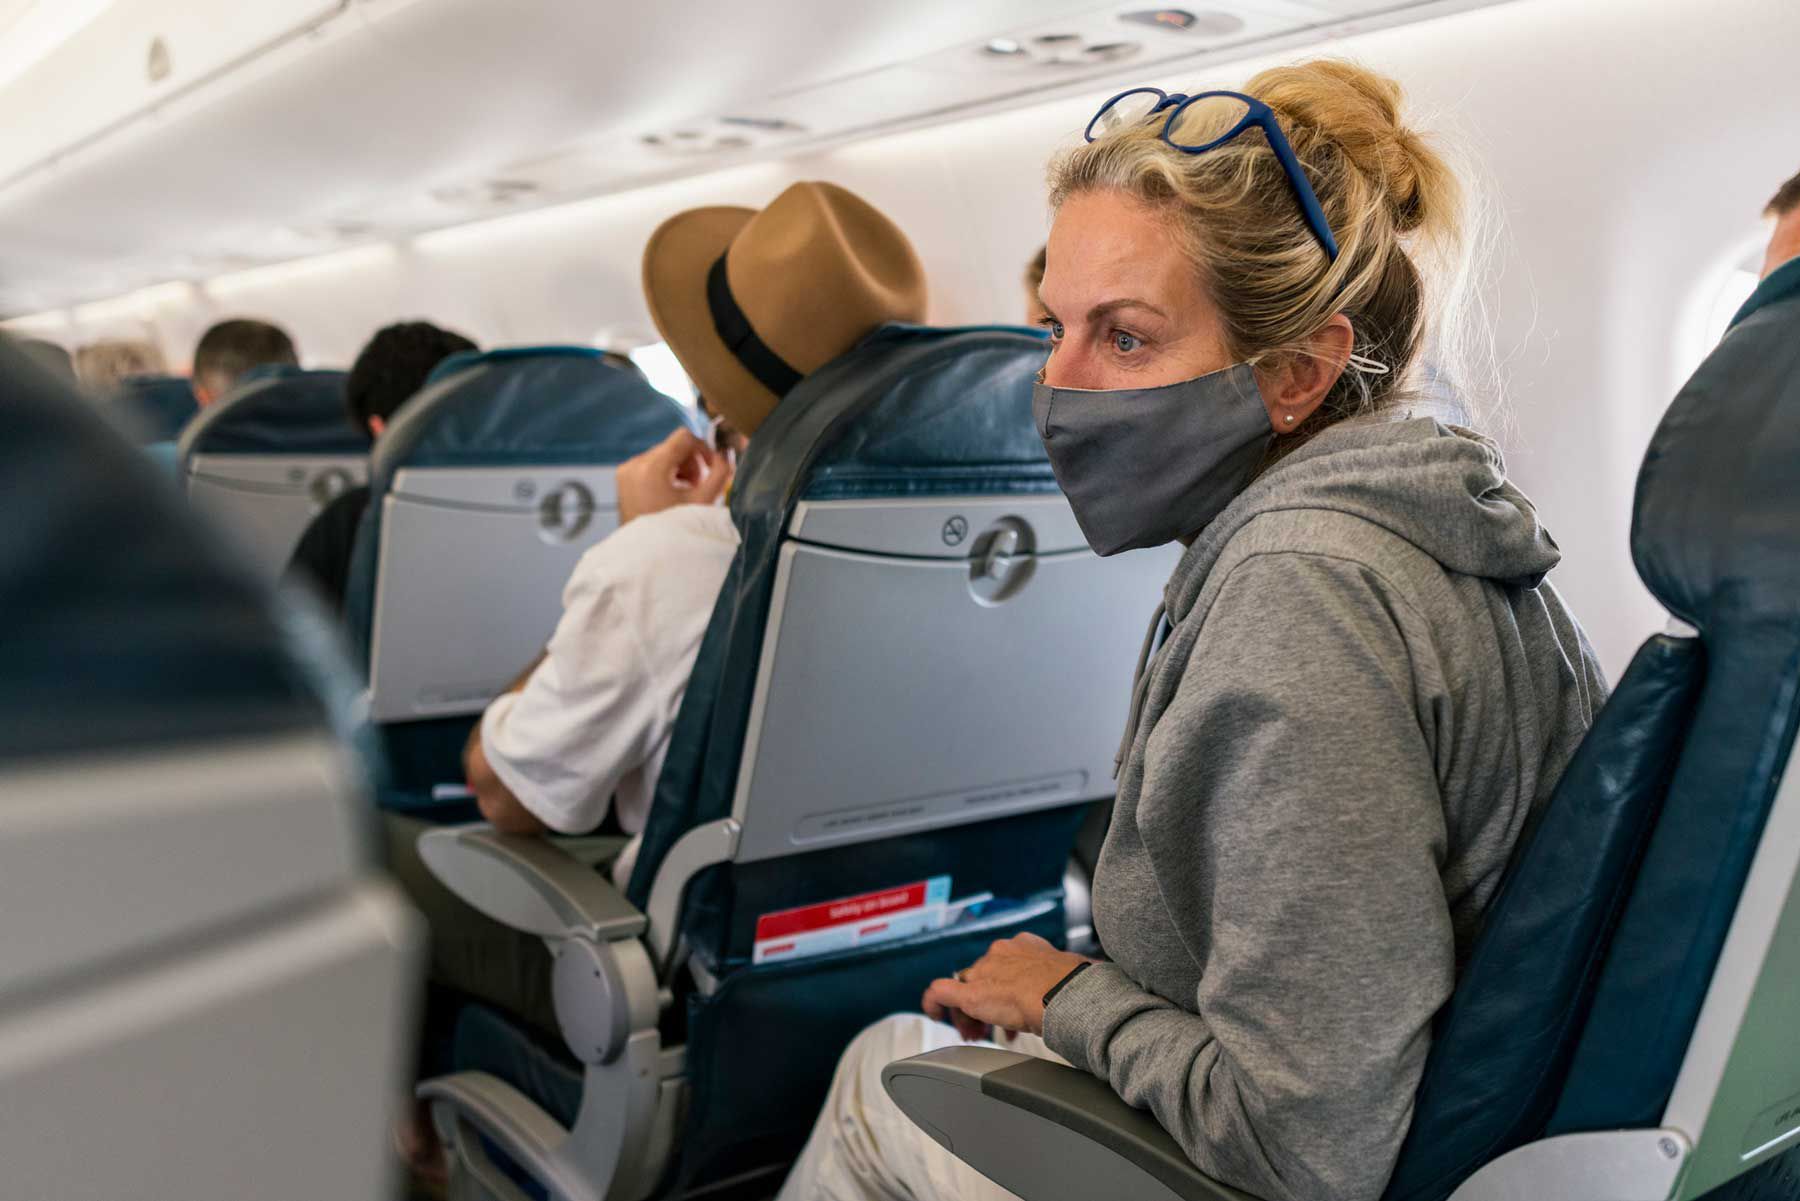 Most Annoying Airline Passengers - New Study Reveals